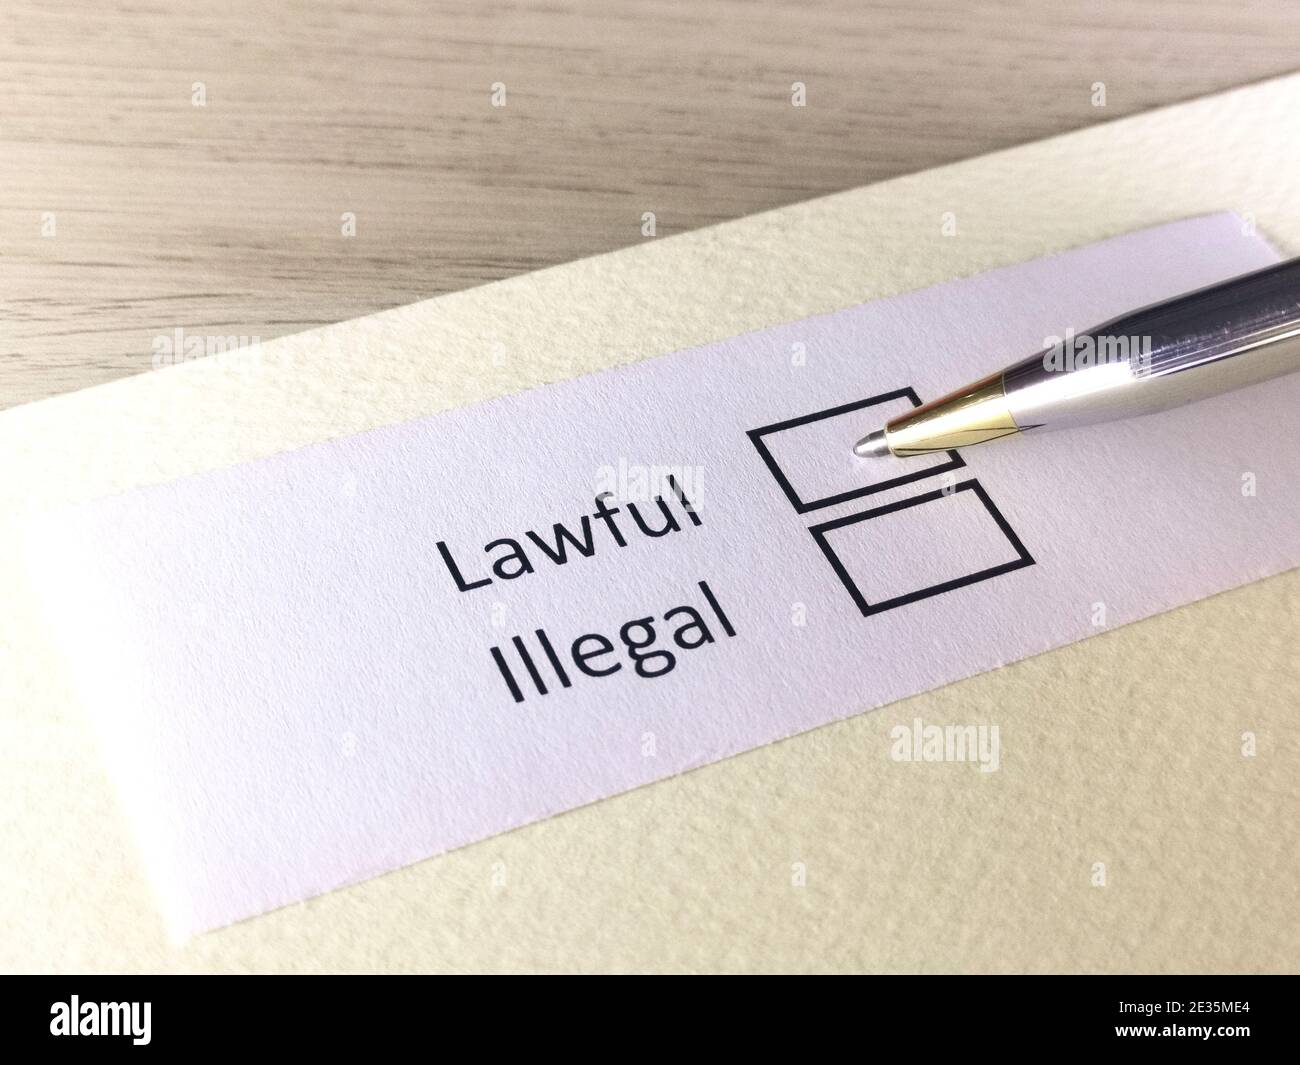 One person is answering question on a piece of paper. The person is thinking to be lawful or illegal. Stock Photo